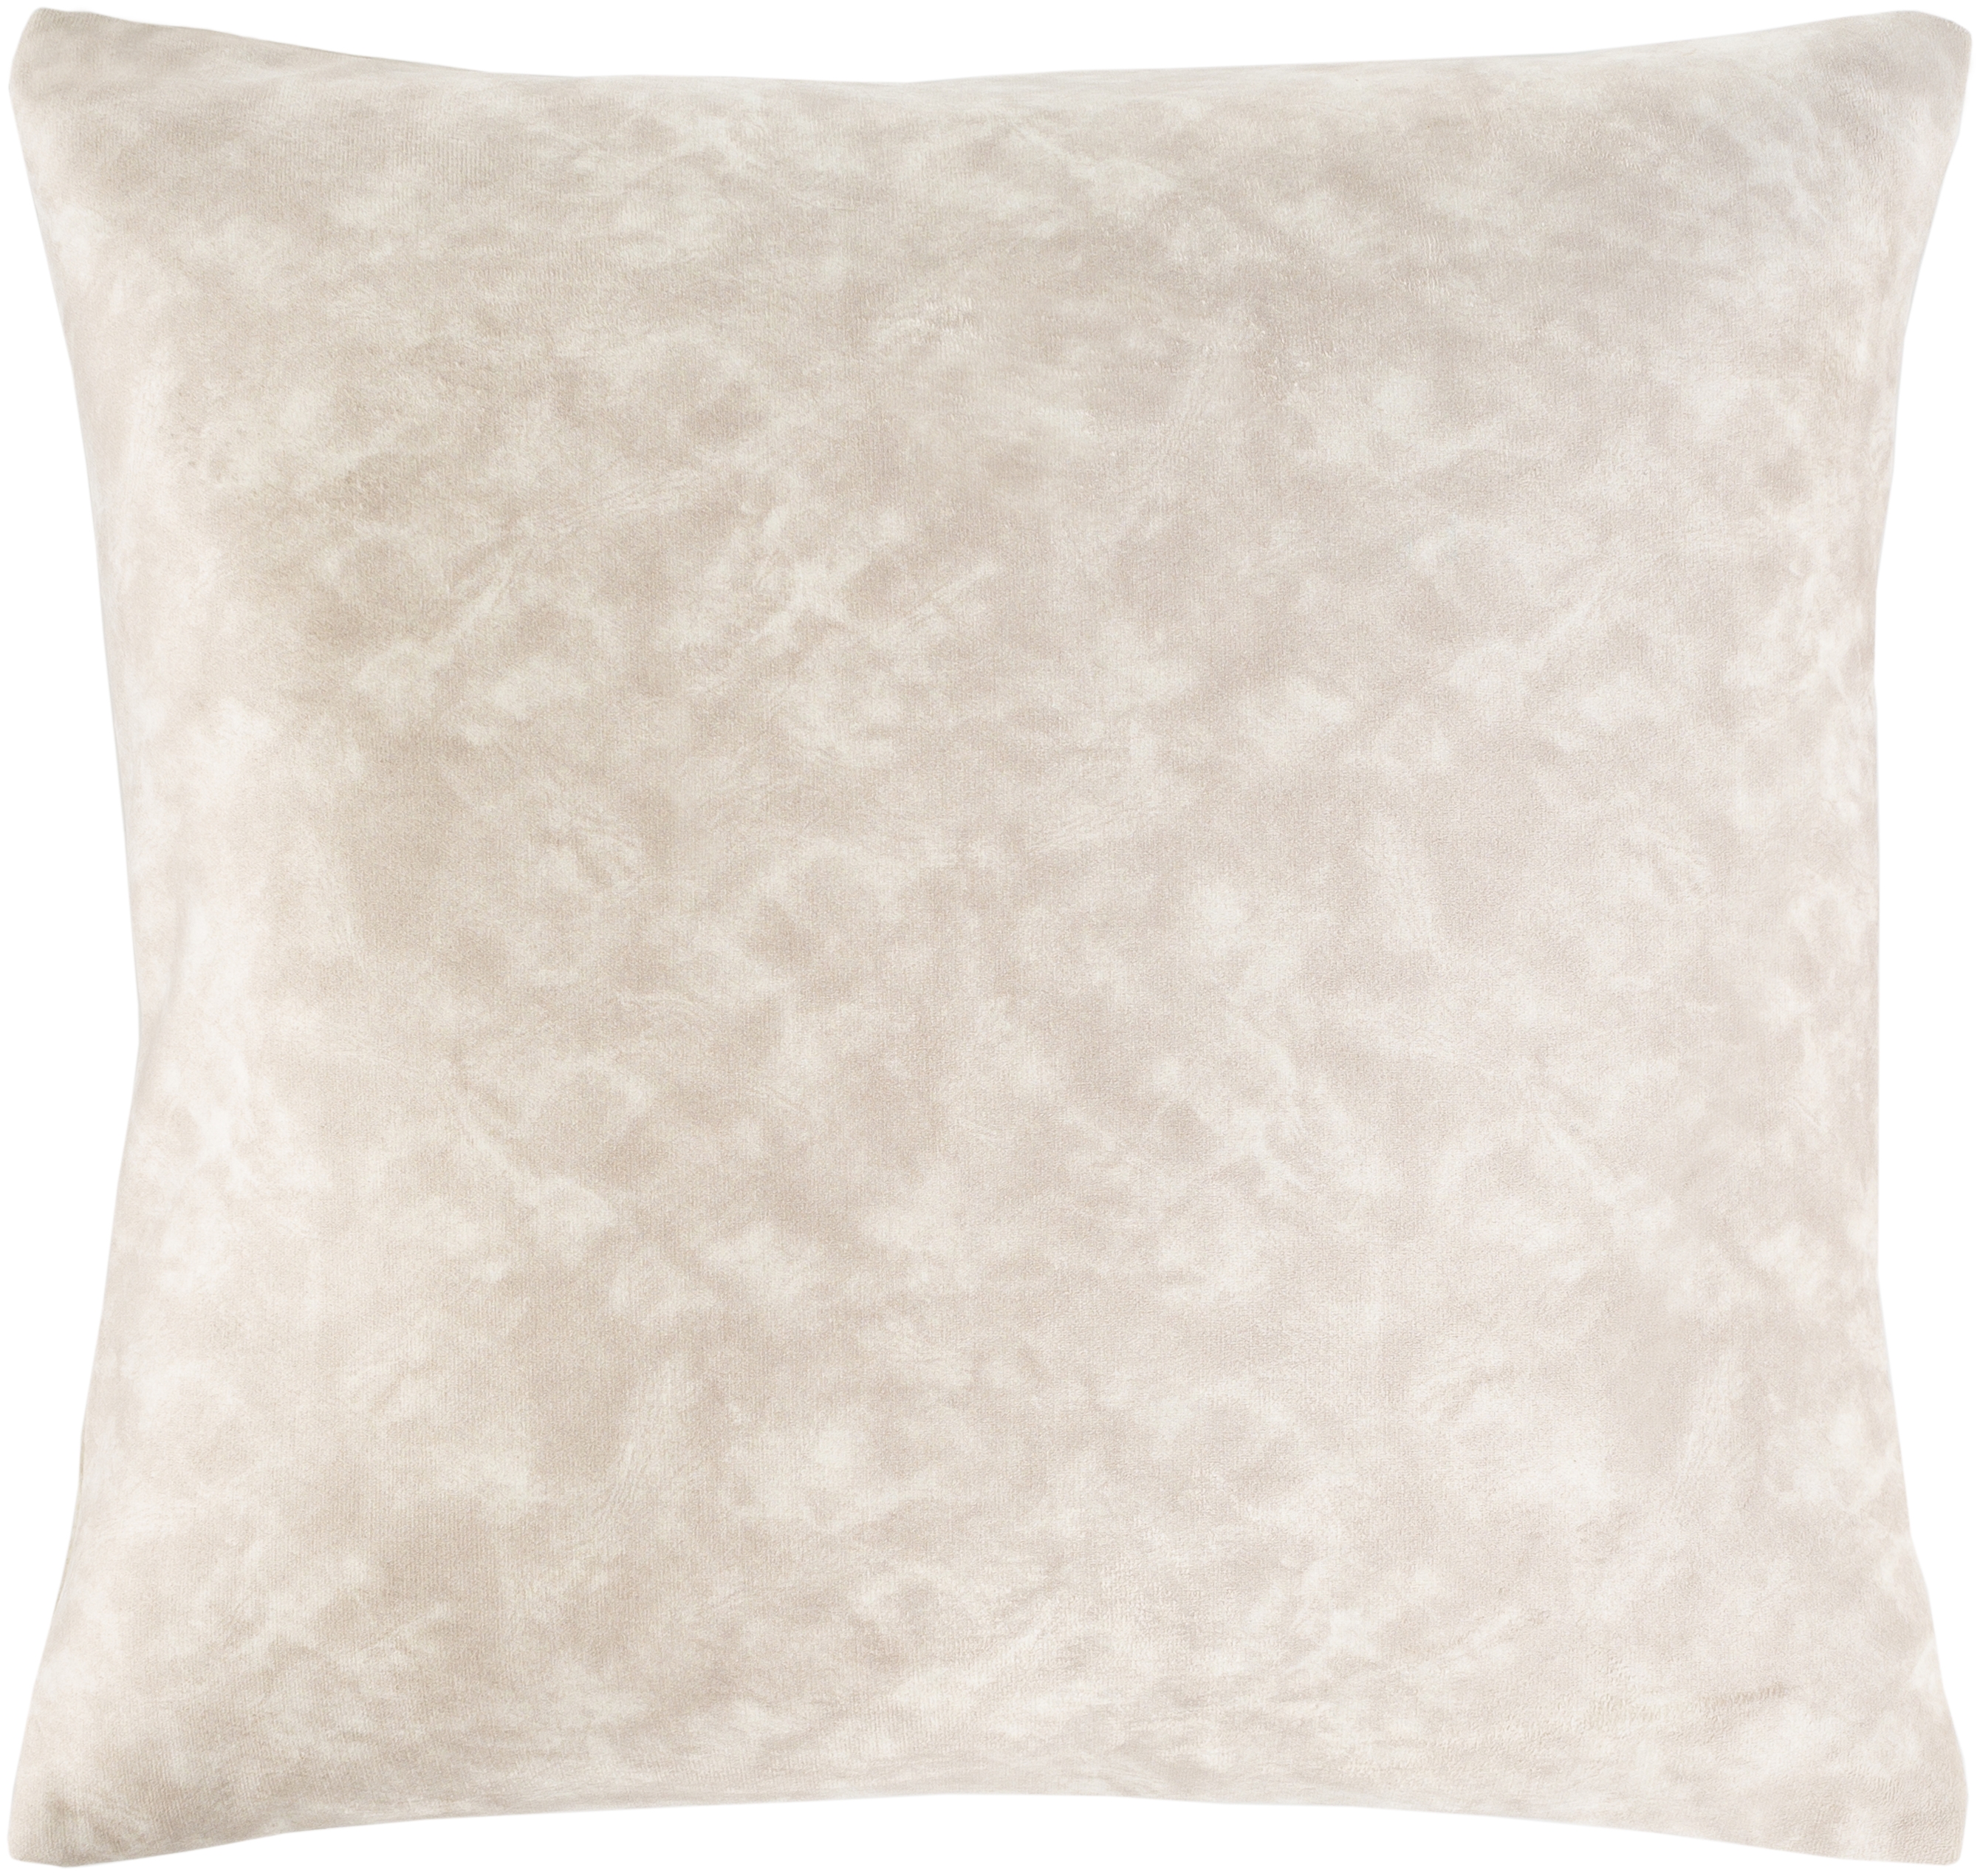 Collins Throw Pillow, 20" x 20", with down insert - Image 0